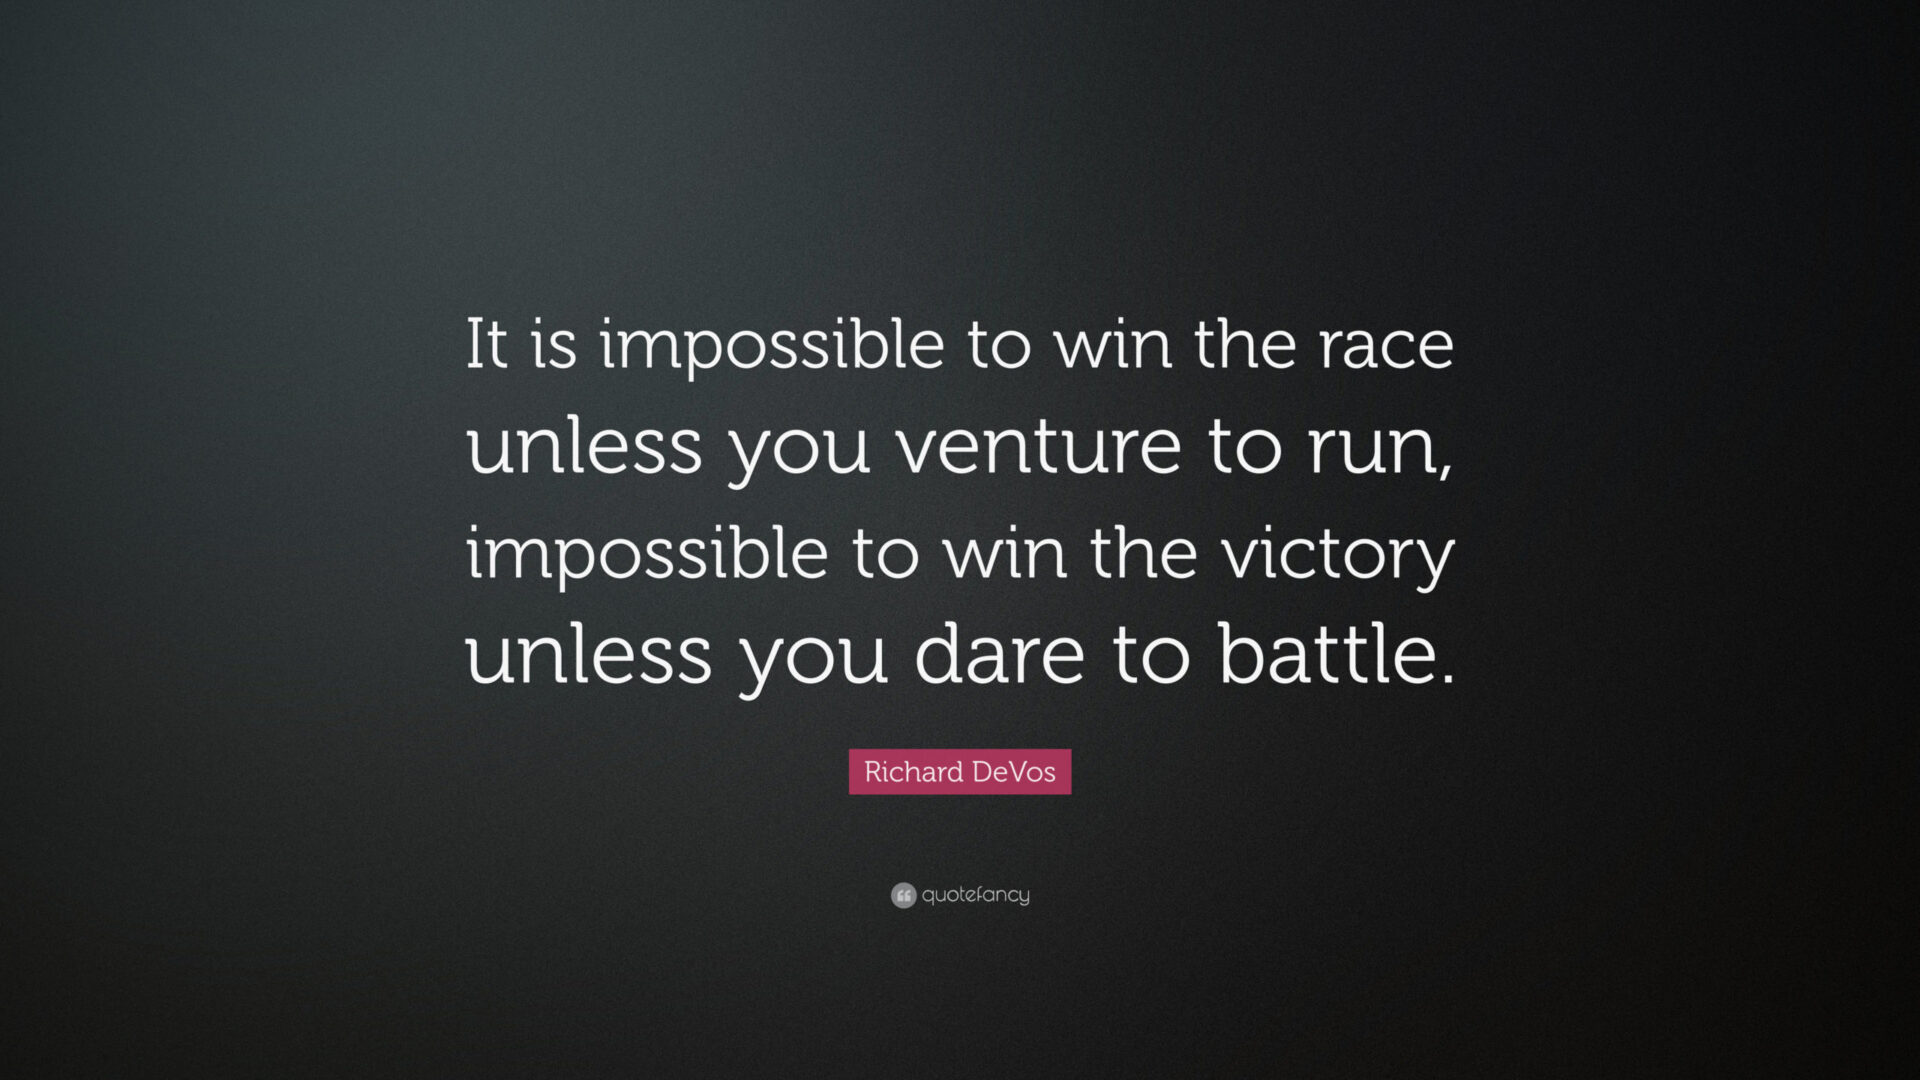 It is impossible to win unless...